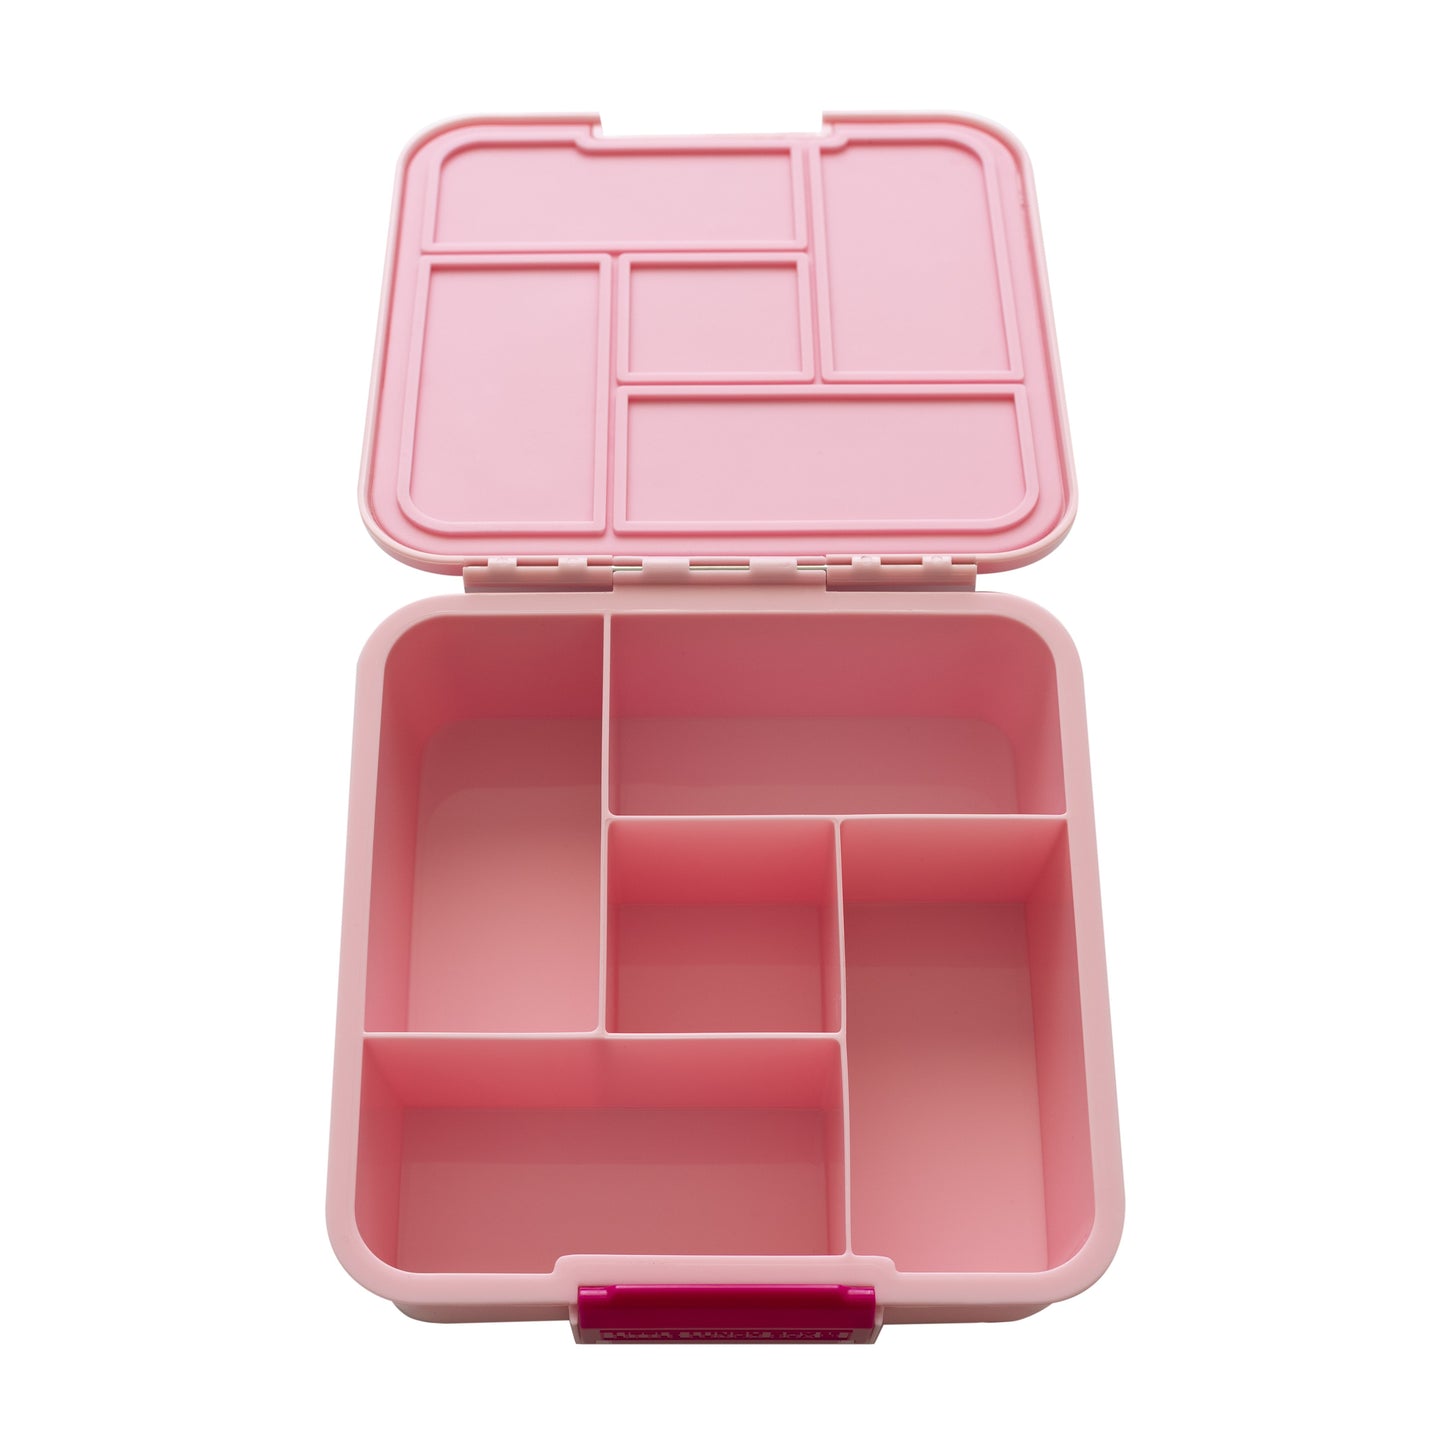 Little Lunch Box Co - Bento Five - Kitty